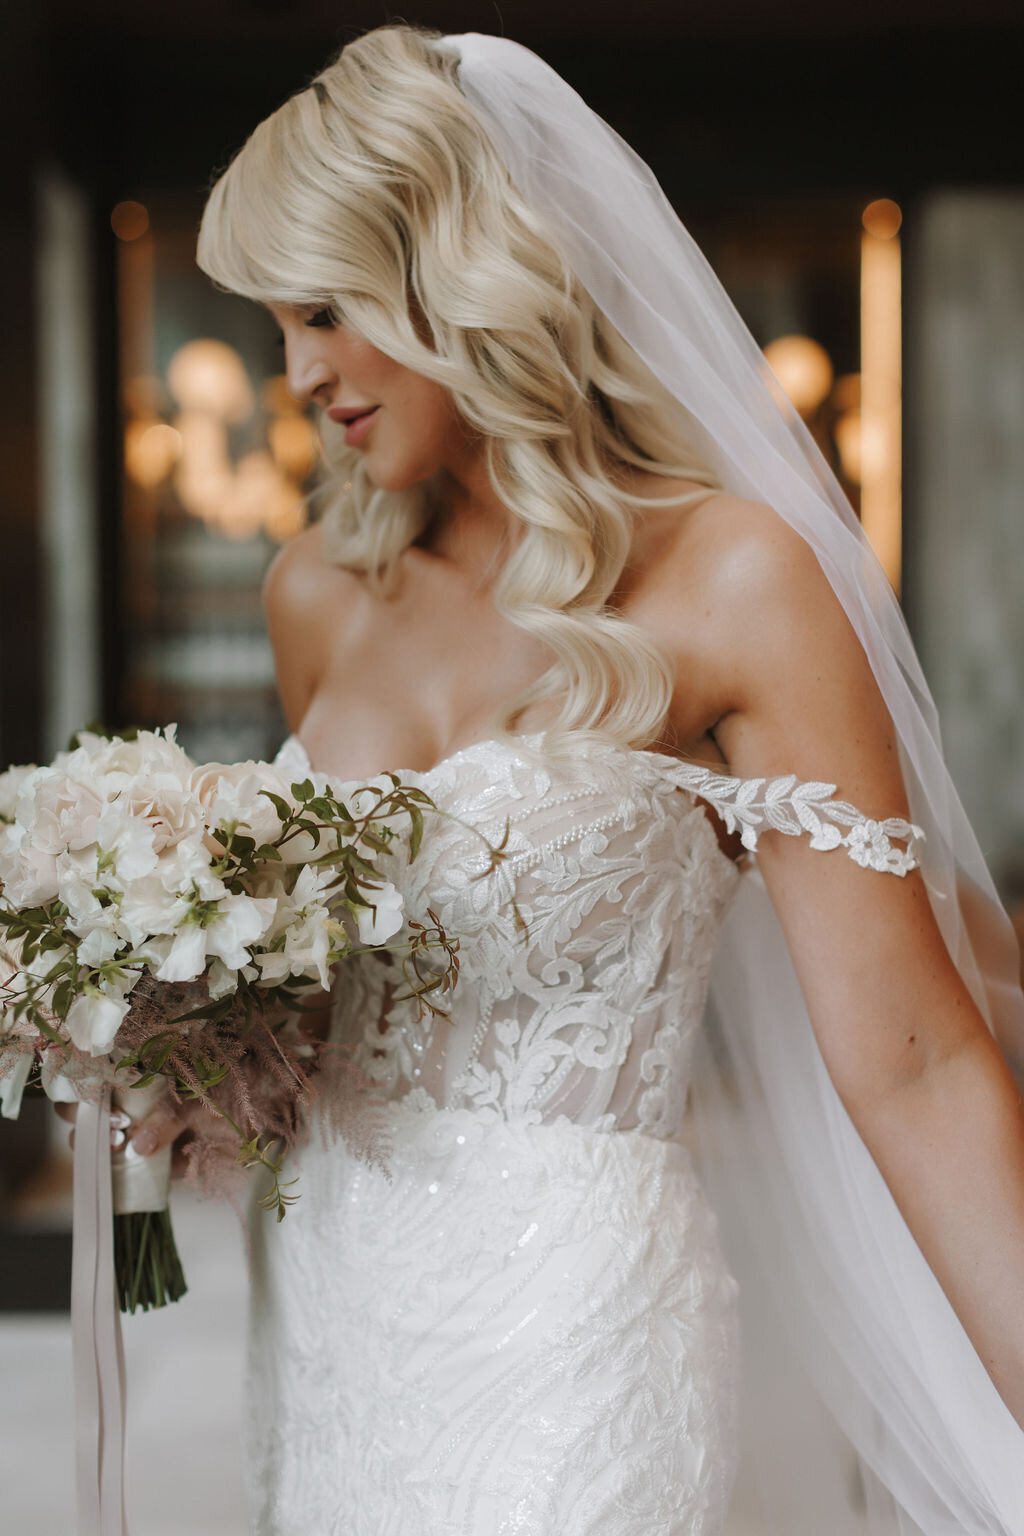 Beautiful bride in her wedding gown with white and baby pink wedding bouquet.